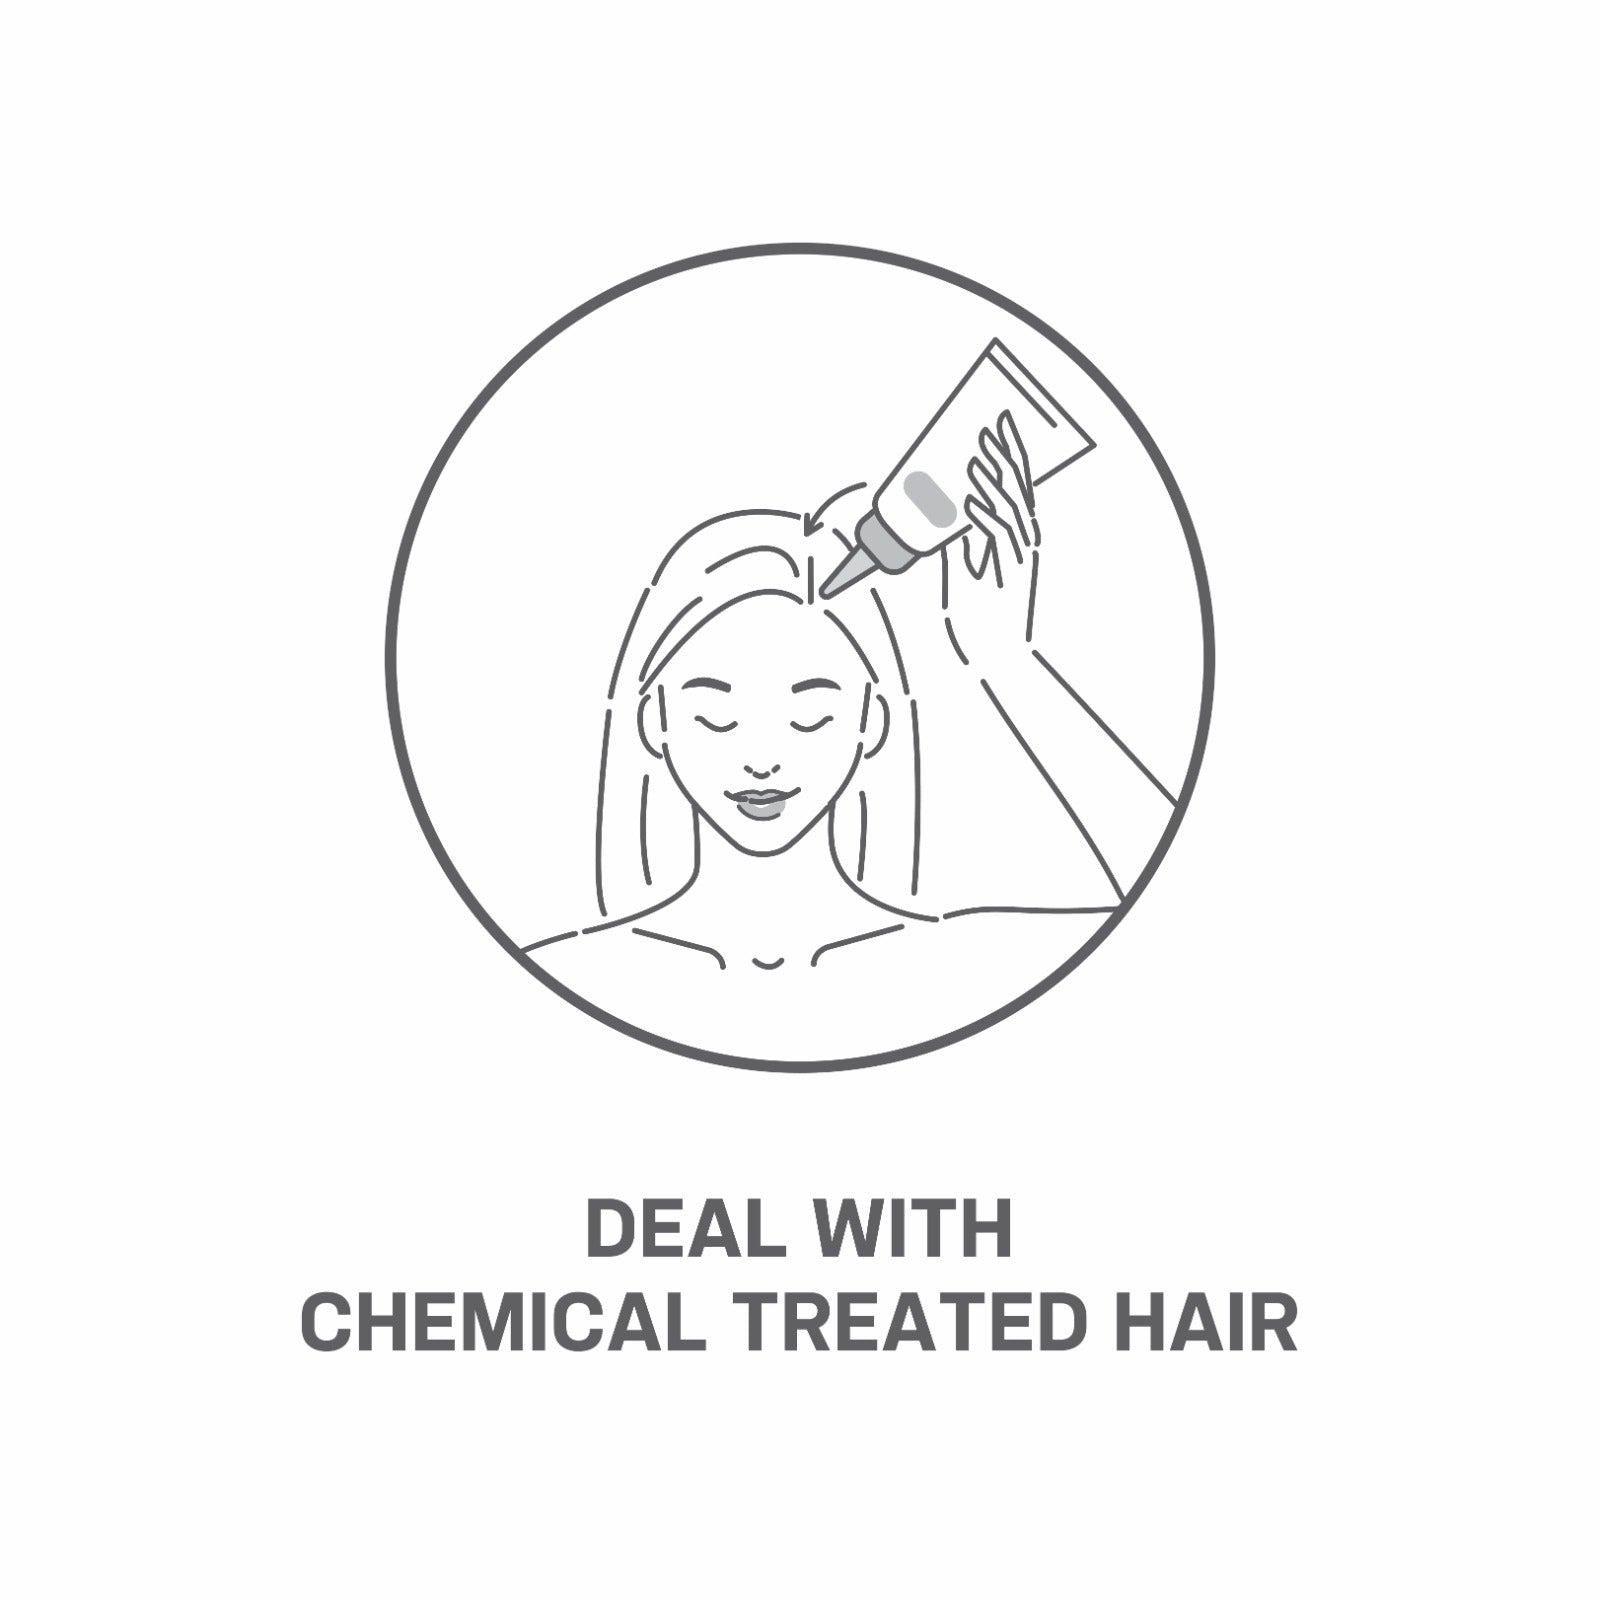 How to deal with chemical treated hair